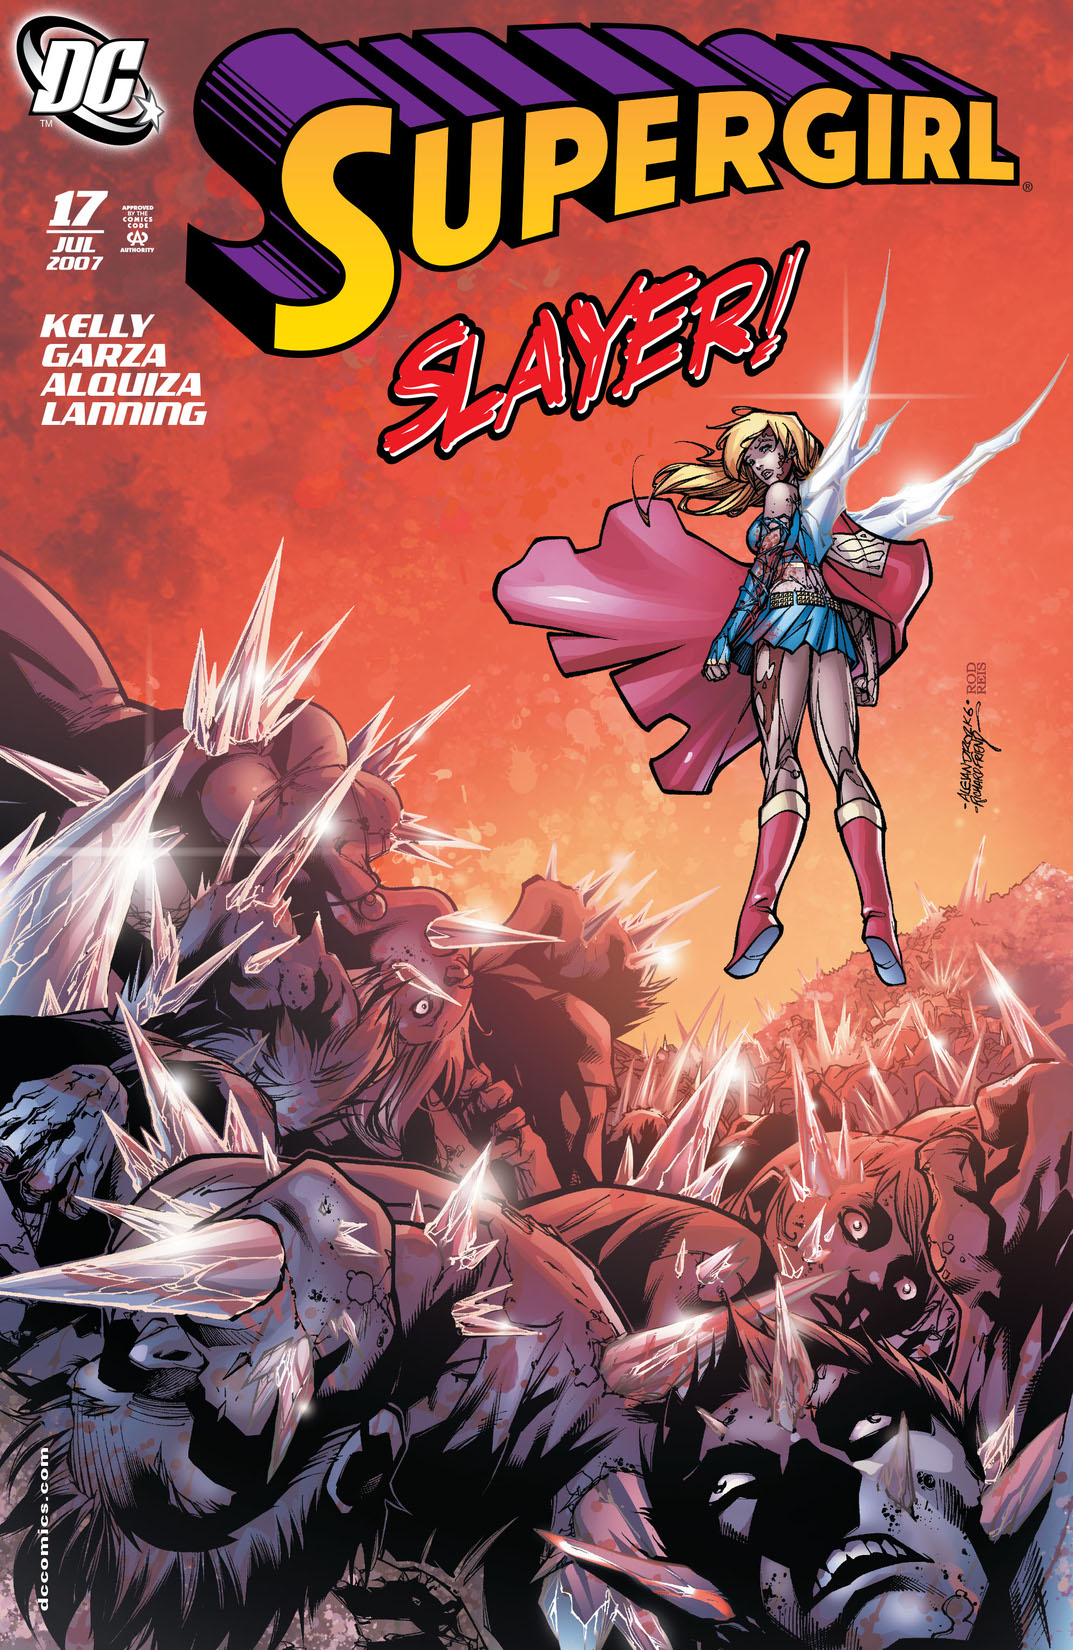 Supergirl (2005-) #17 preview images